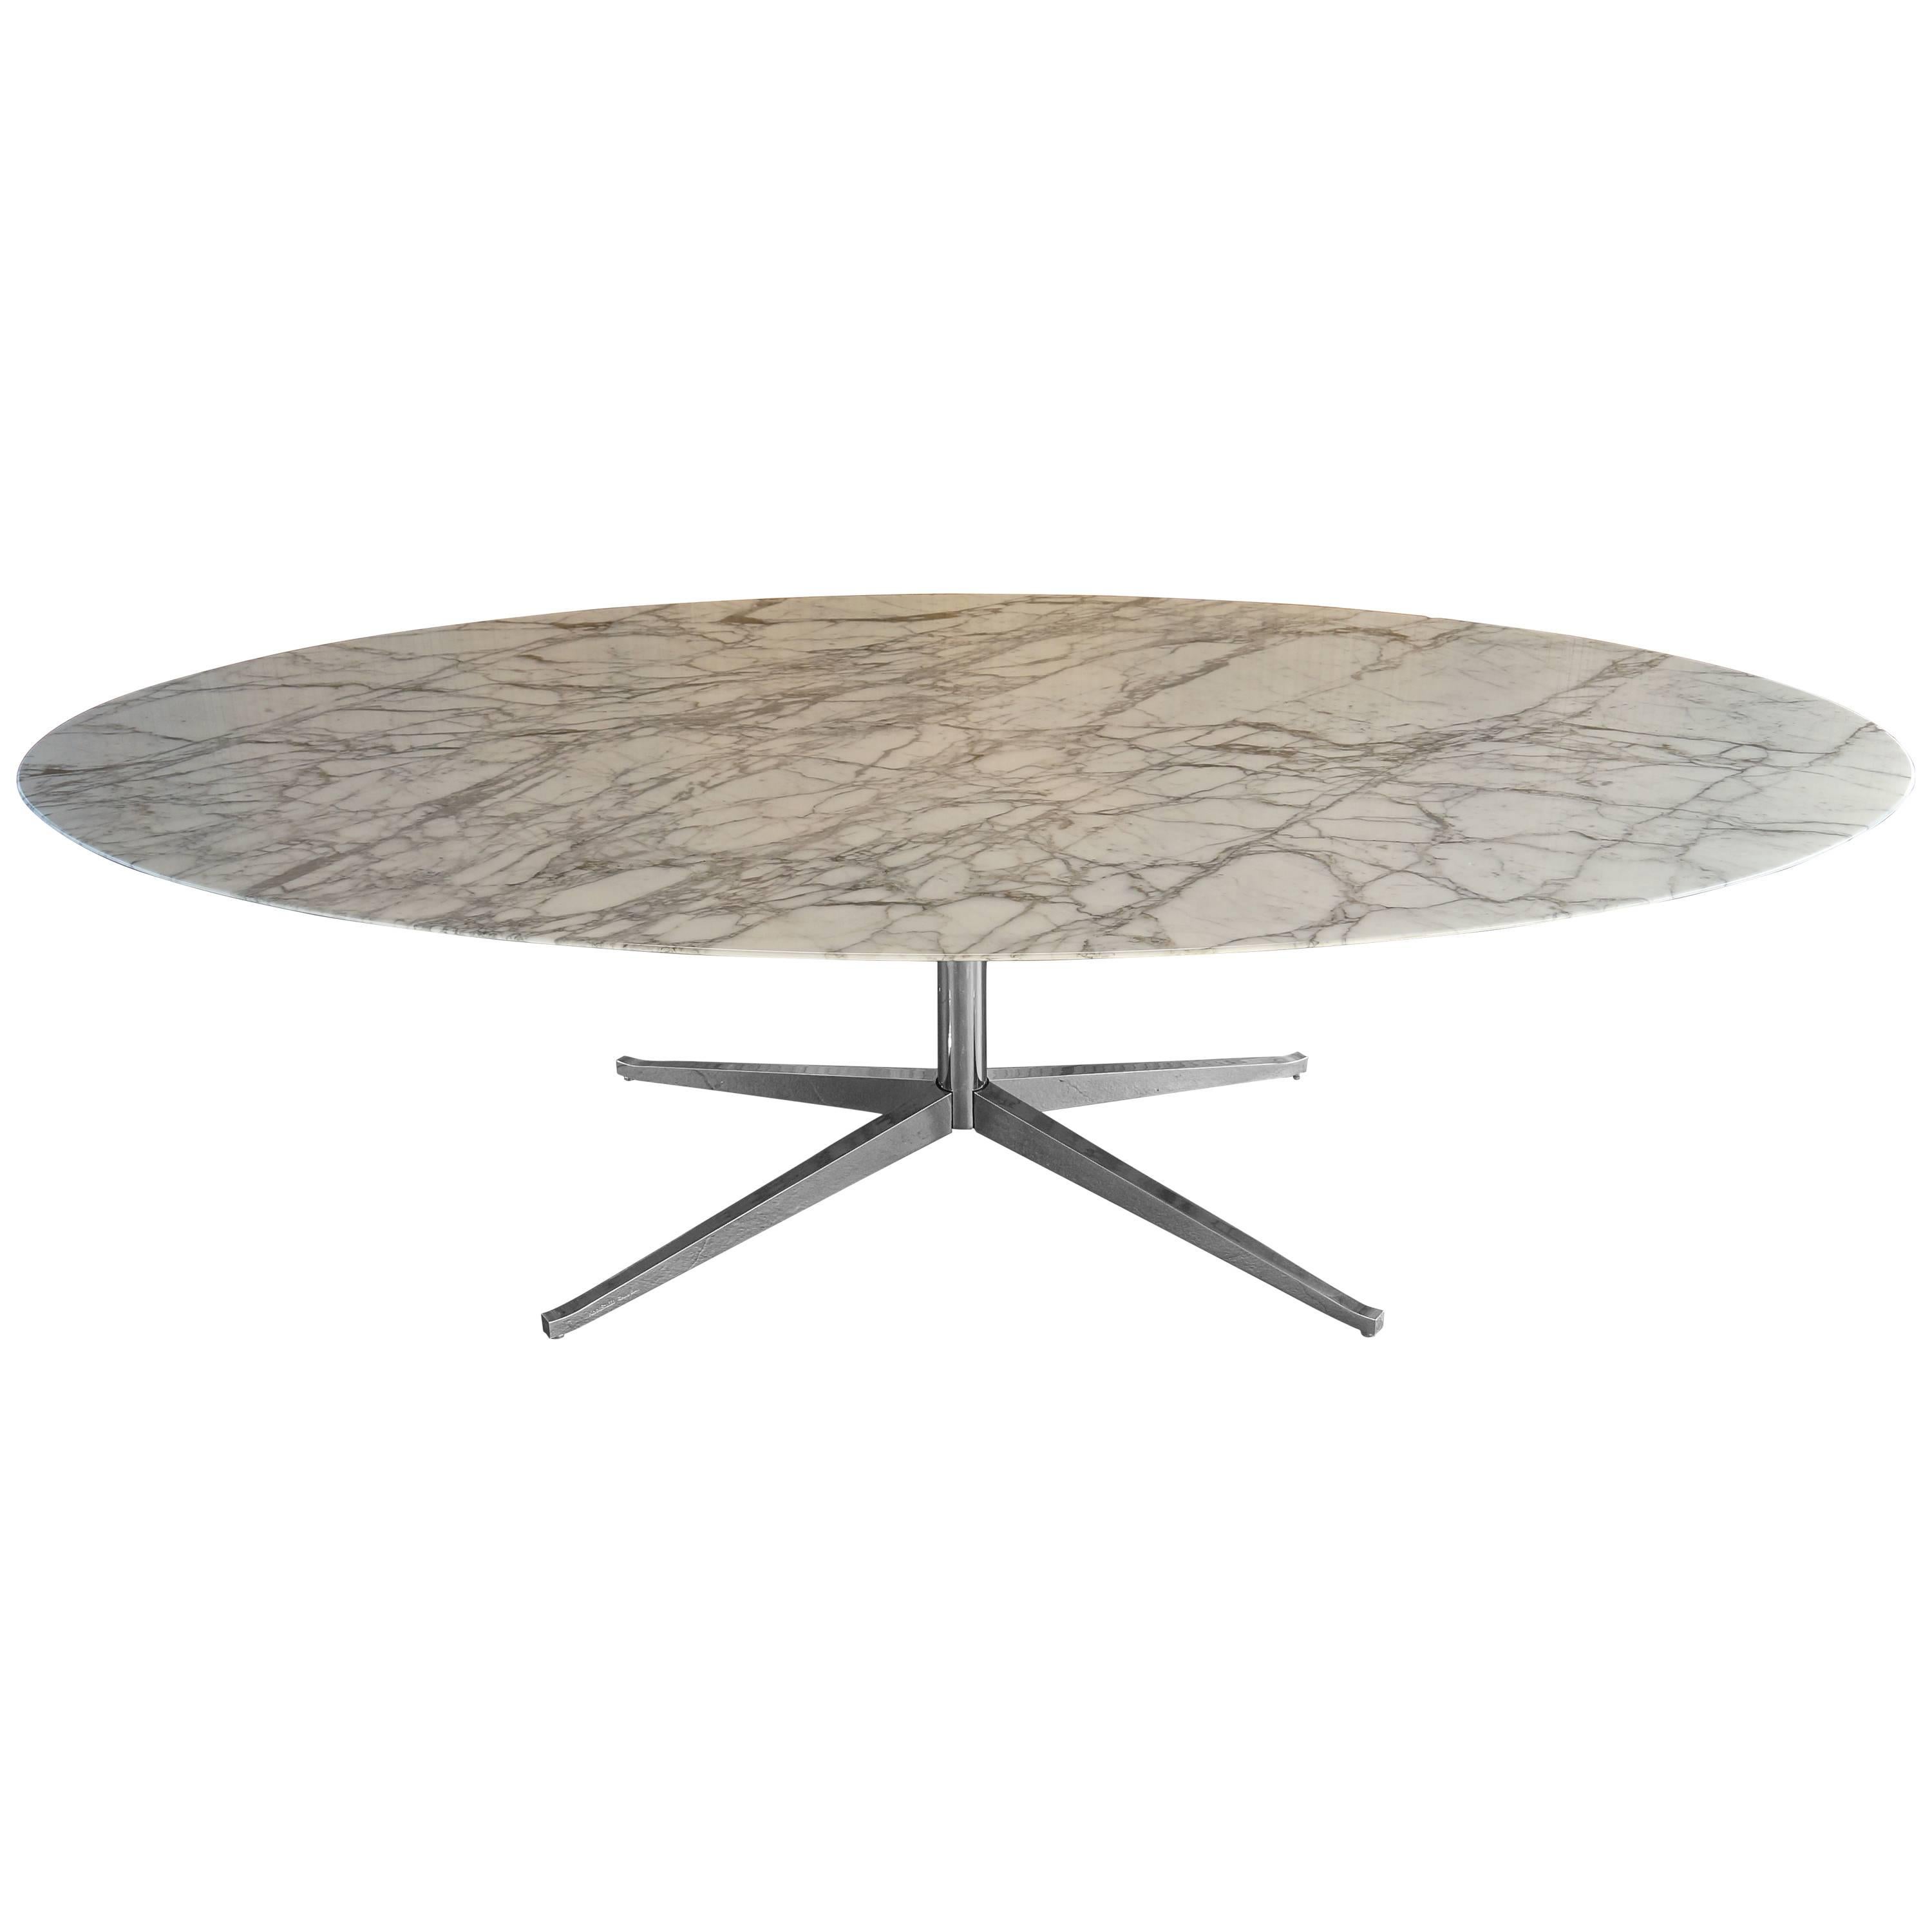 Florence Knoll White Calacatta Oval Marble Dining Table, Desk / Tulip Table